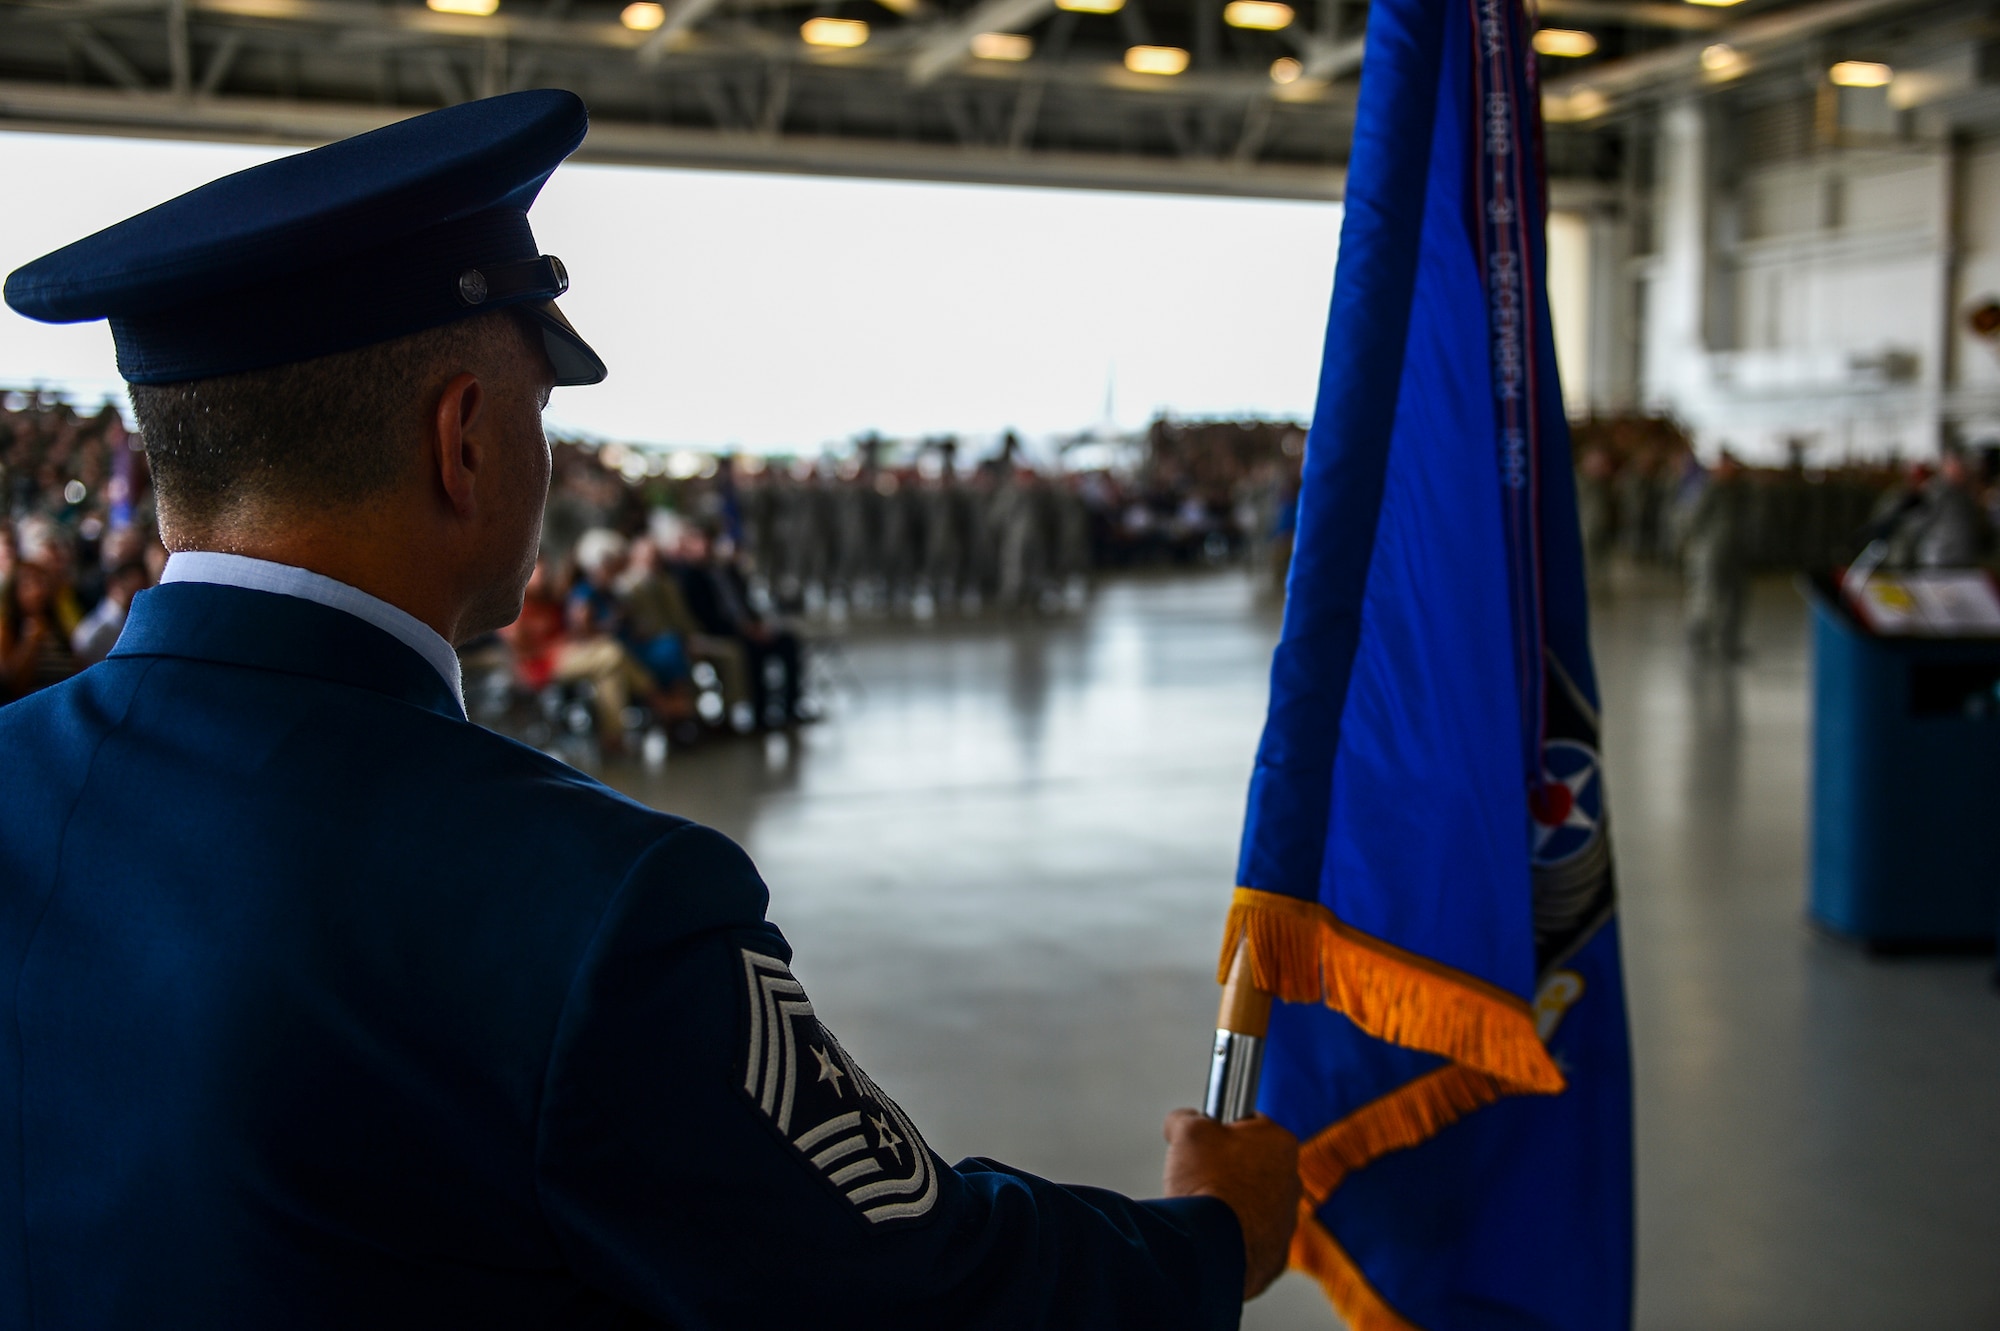 Chief Master Sgt. Matthew Caruso, Air Force Special Operations Command command chief, holds the command flag during the AFSOC change of command ceremony at Hurlburt Field, Fla., July 3, 2014. The command's mission is to present combat-ready Air Force Special Operations Forces to conduct and support global special operations missions. (U.S. Air Force photo by Airman 1st Class Jeff Parkinson)